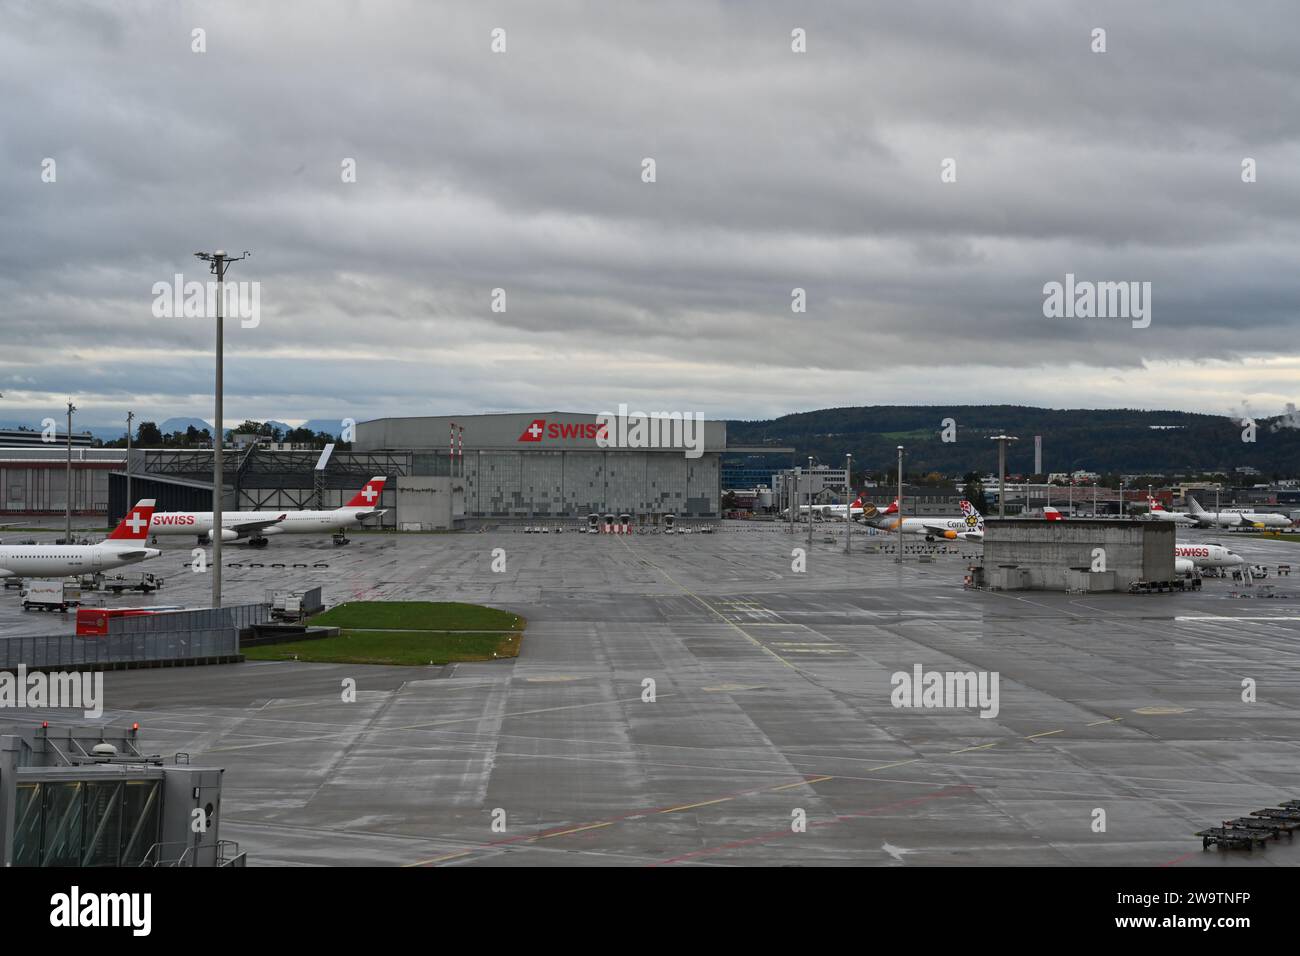 Wet area of Zurich airport where  planes of Swiss airlines company are parked. Stock Photo